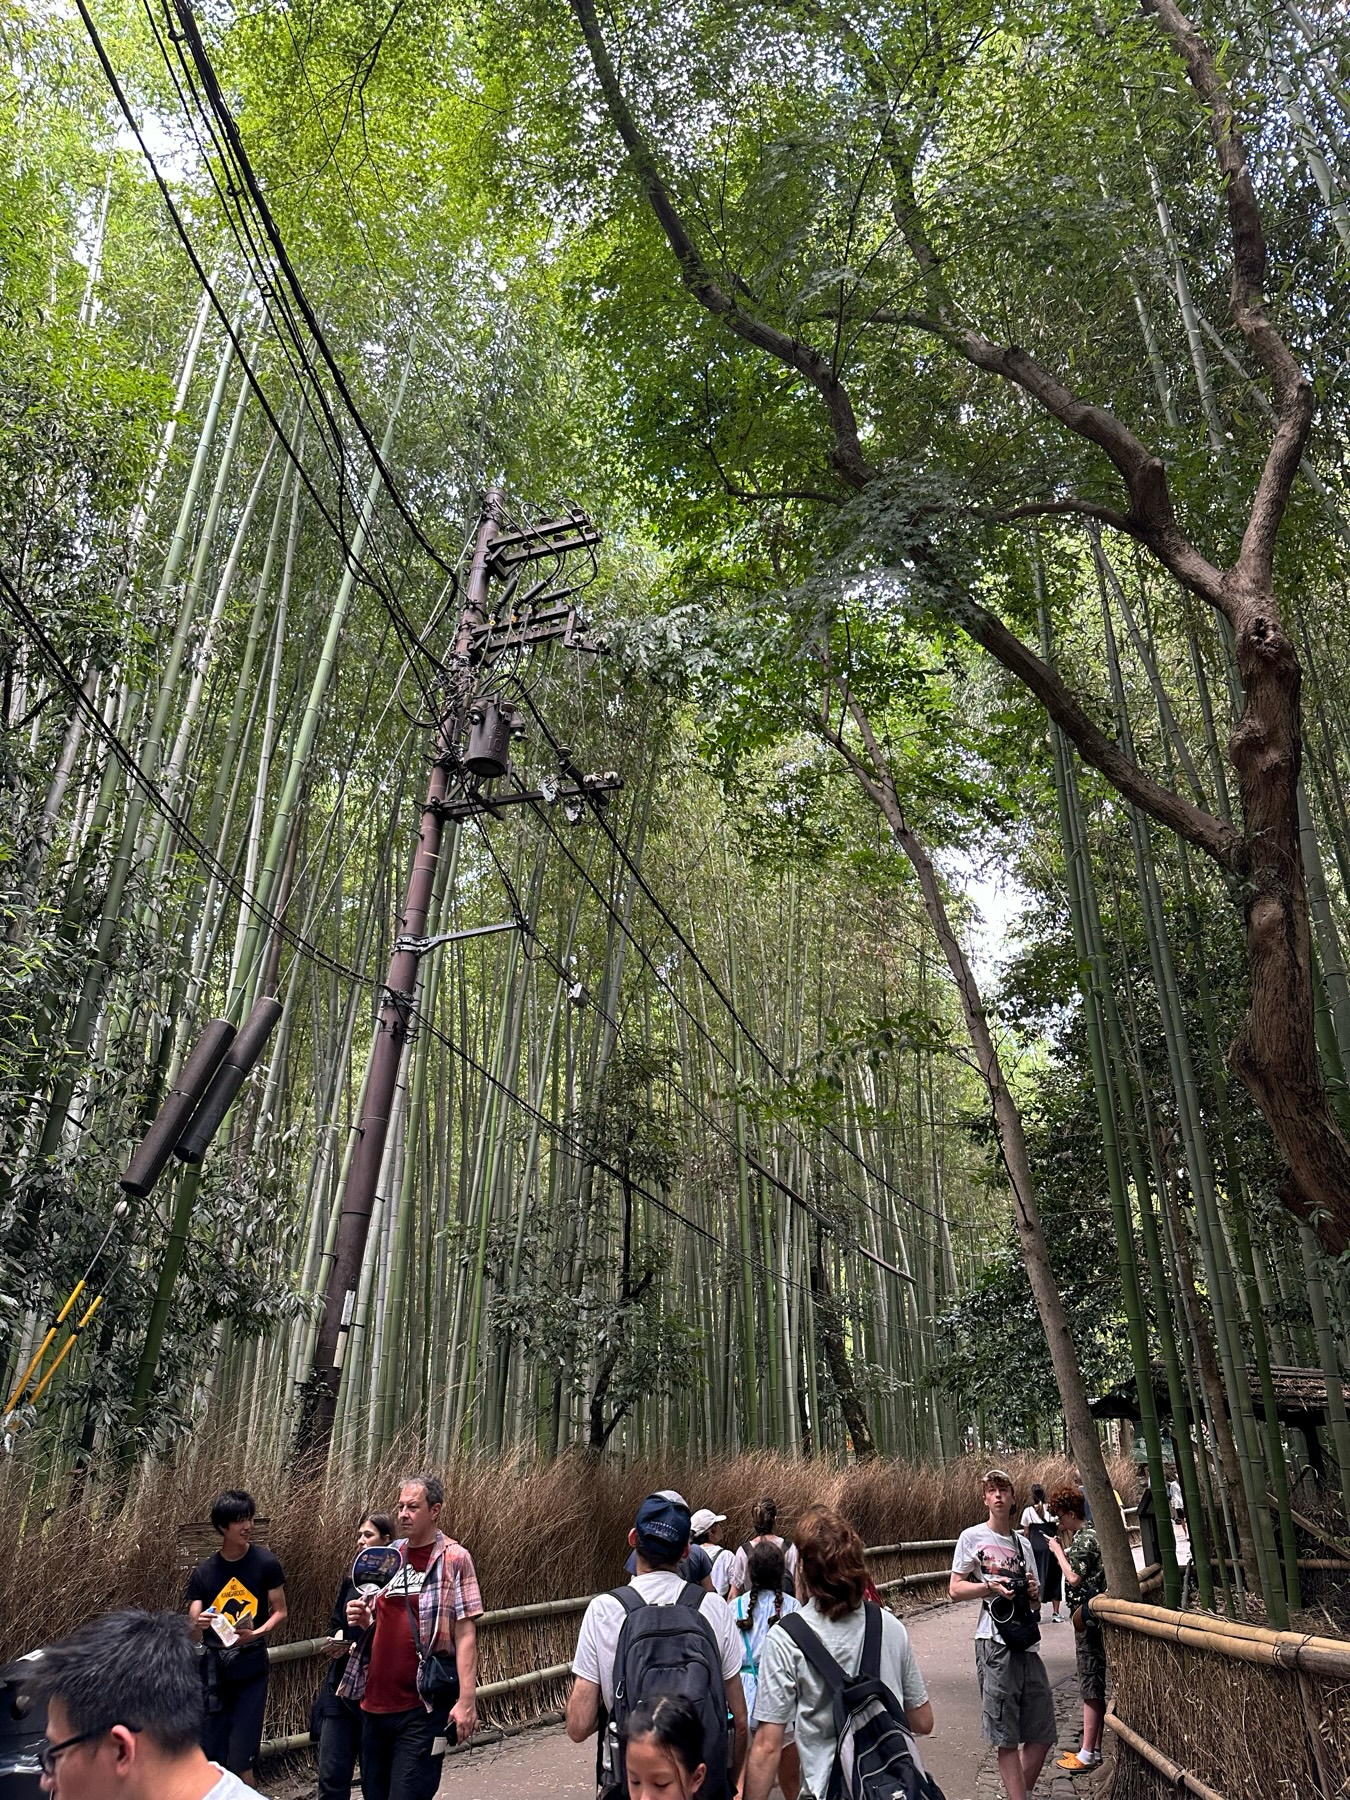 Another view of the bamboo forest walkway